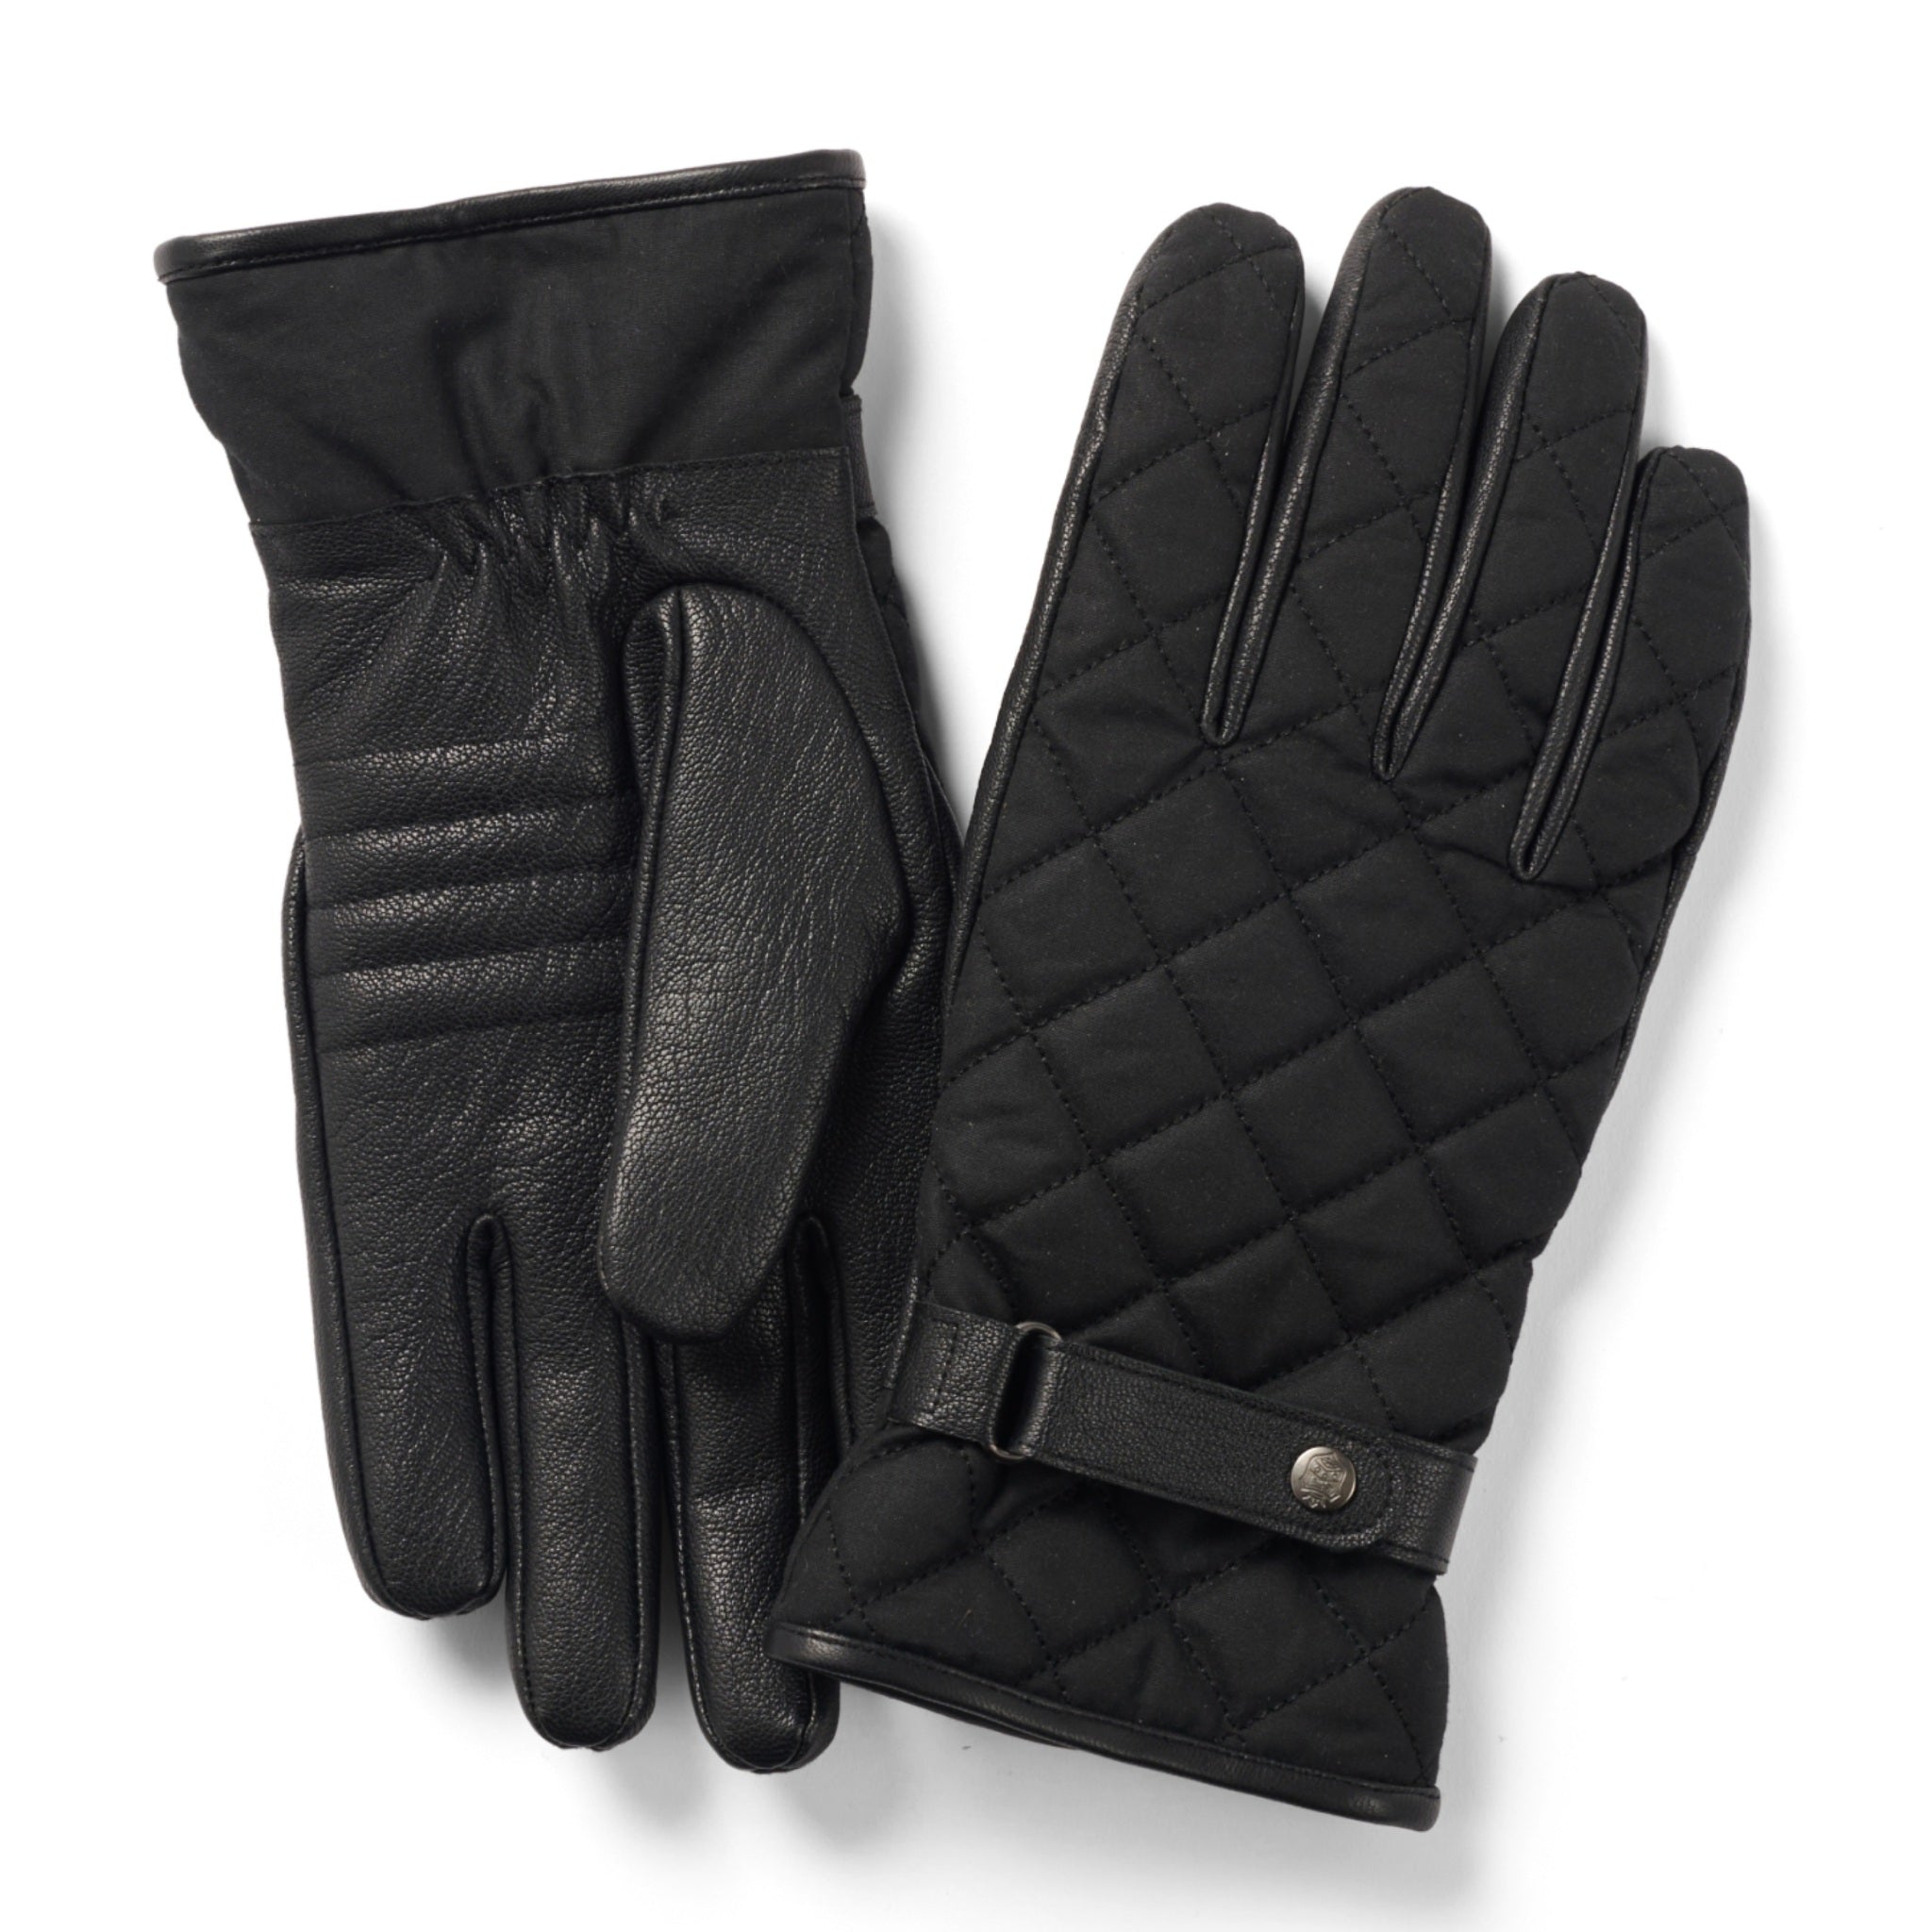 The Hat Shop Failsworth Mens Wax-Leather Touchscreen Gloves Black